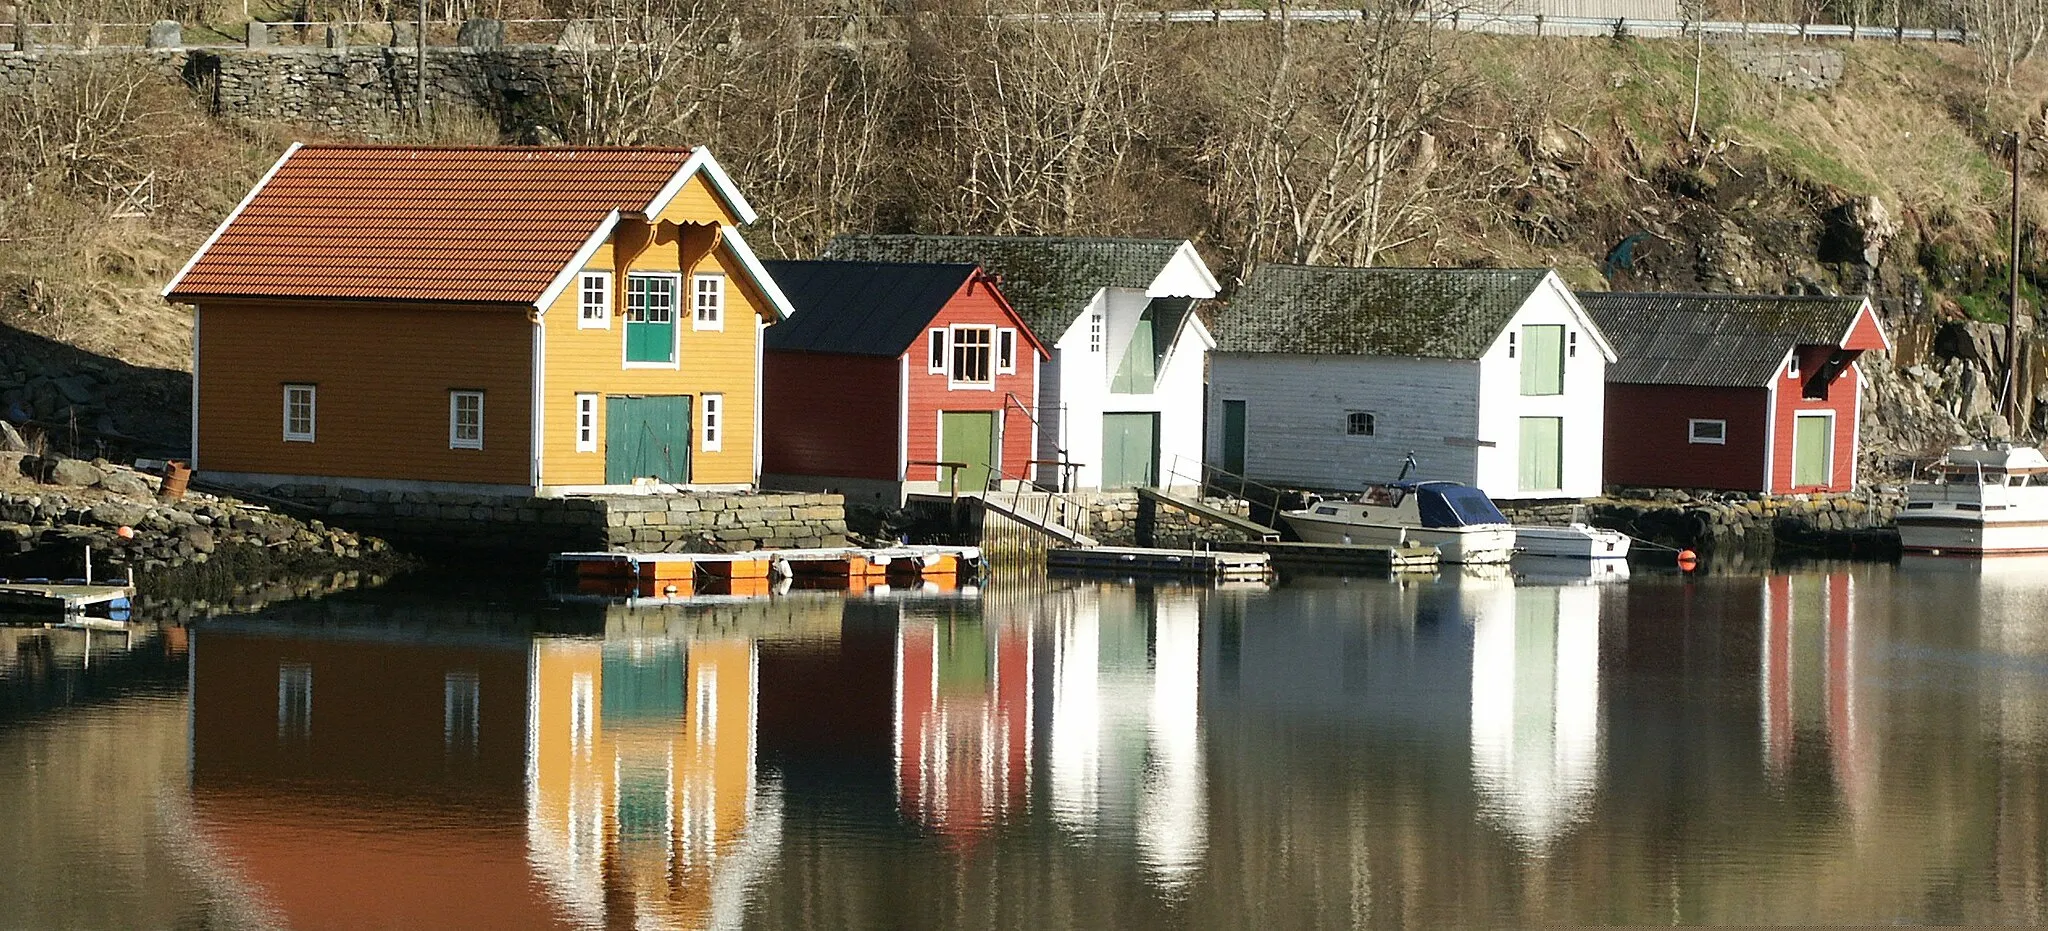 Photo showing: Boat houses at Bildøy, Sotra near Bergen, Norway.